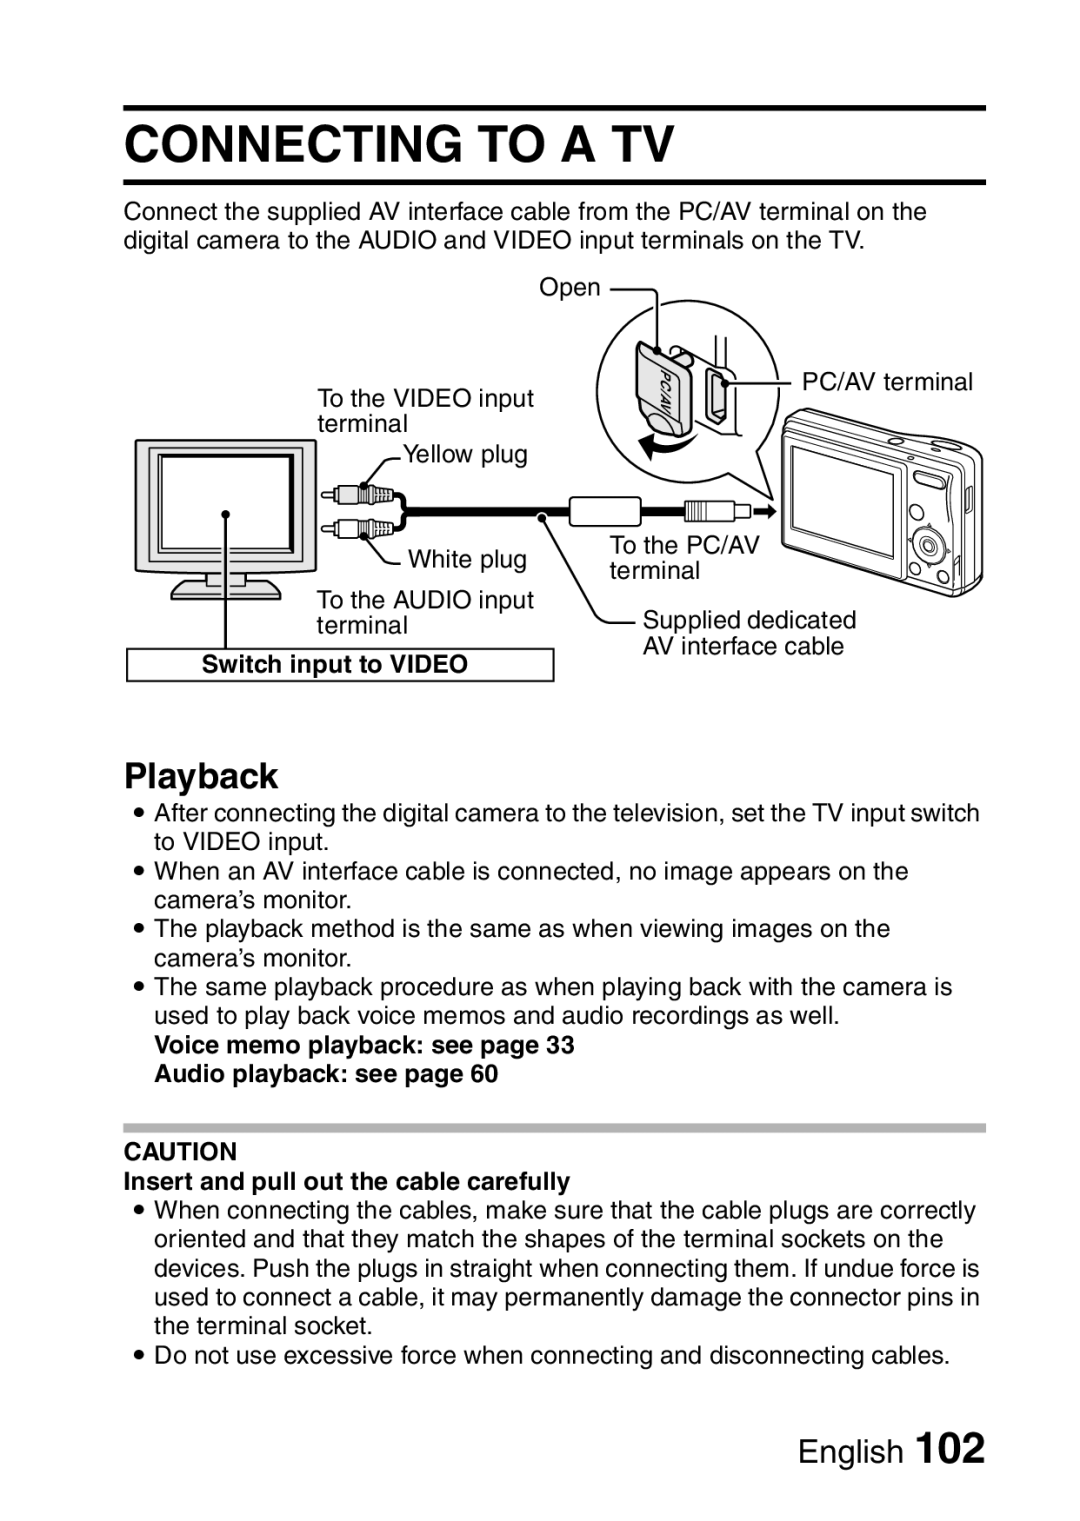 Sanyo VPC-S60 Connecting To A Tv, Playback, Switch input to VIDEO, Voice memo playback see page Audio playback see page 